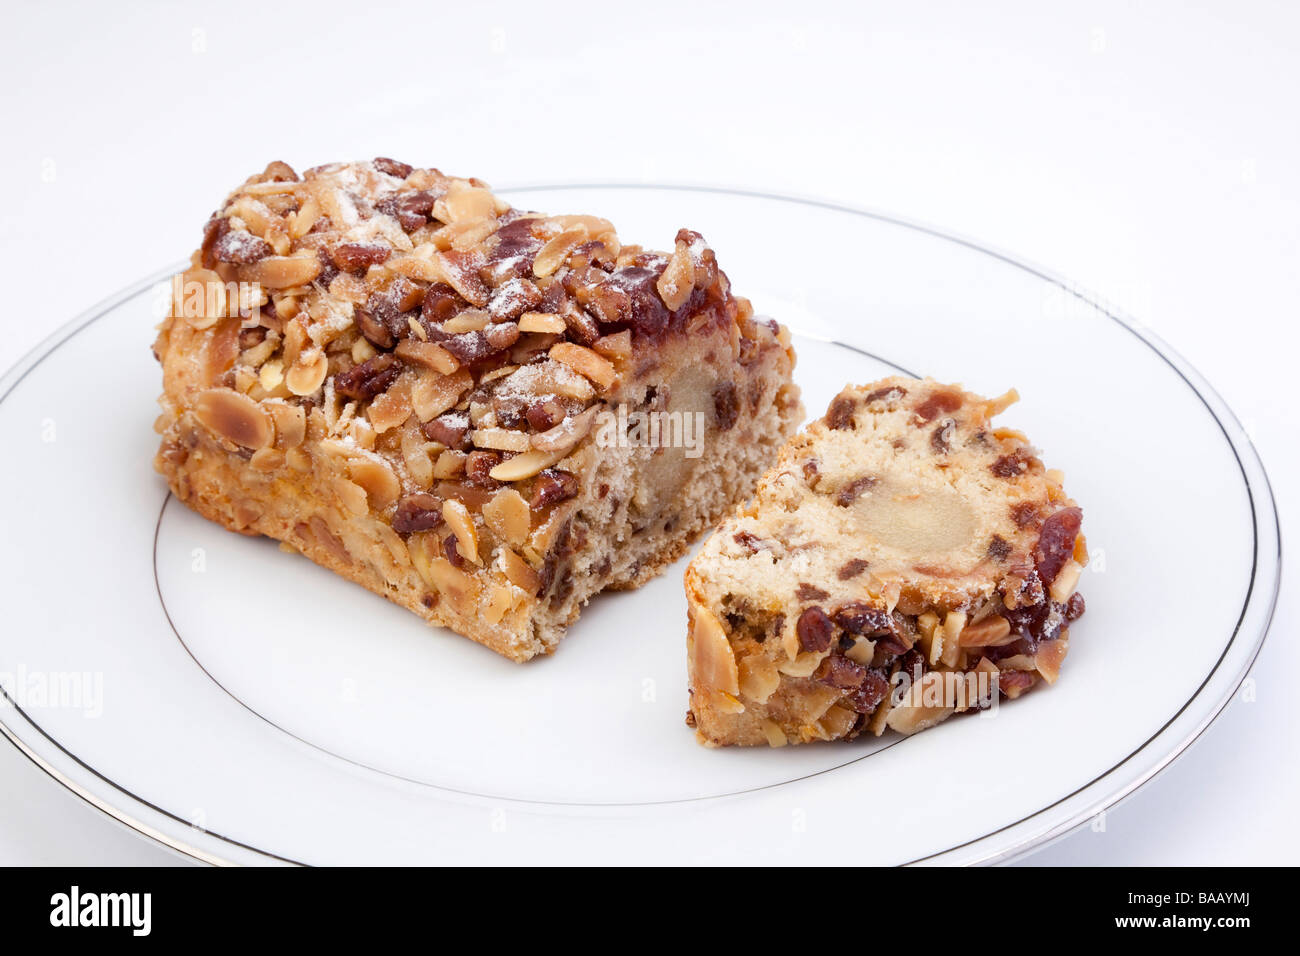 stollen loaf /cake served on a plate Stock Photo